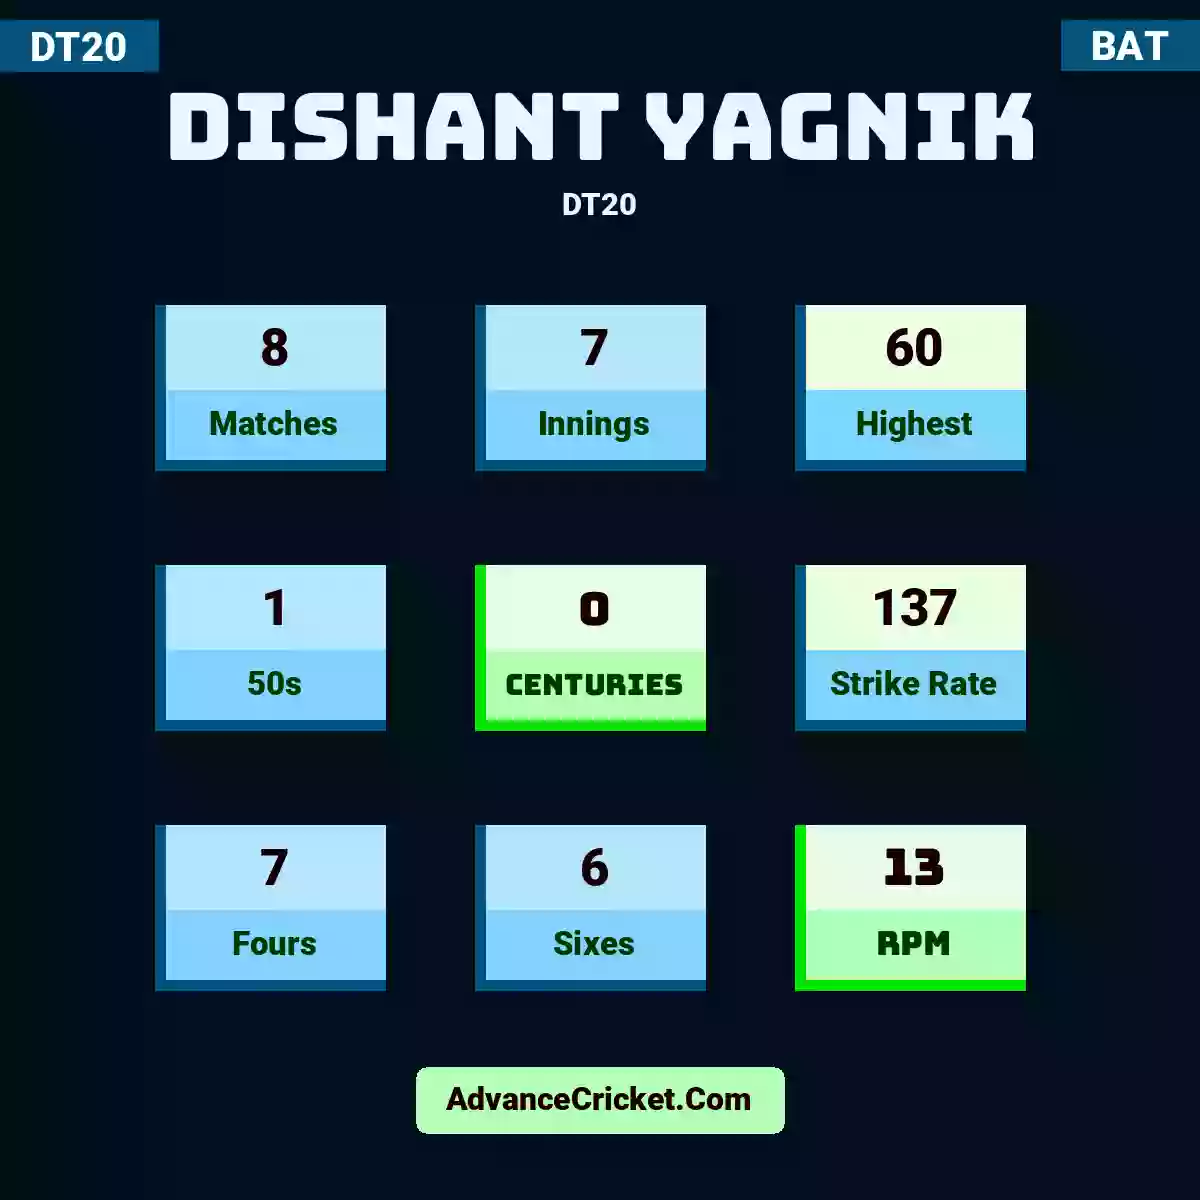 Dishant Yagnik DT20 , Dishant Yagnik played 8 matches, scored 60 runs as highest, 1 half-centuries, and 0 centuries, with a strike rate of 137. D.Yagnik hit 7 fours and 6 sixes, with an RPM of 13.